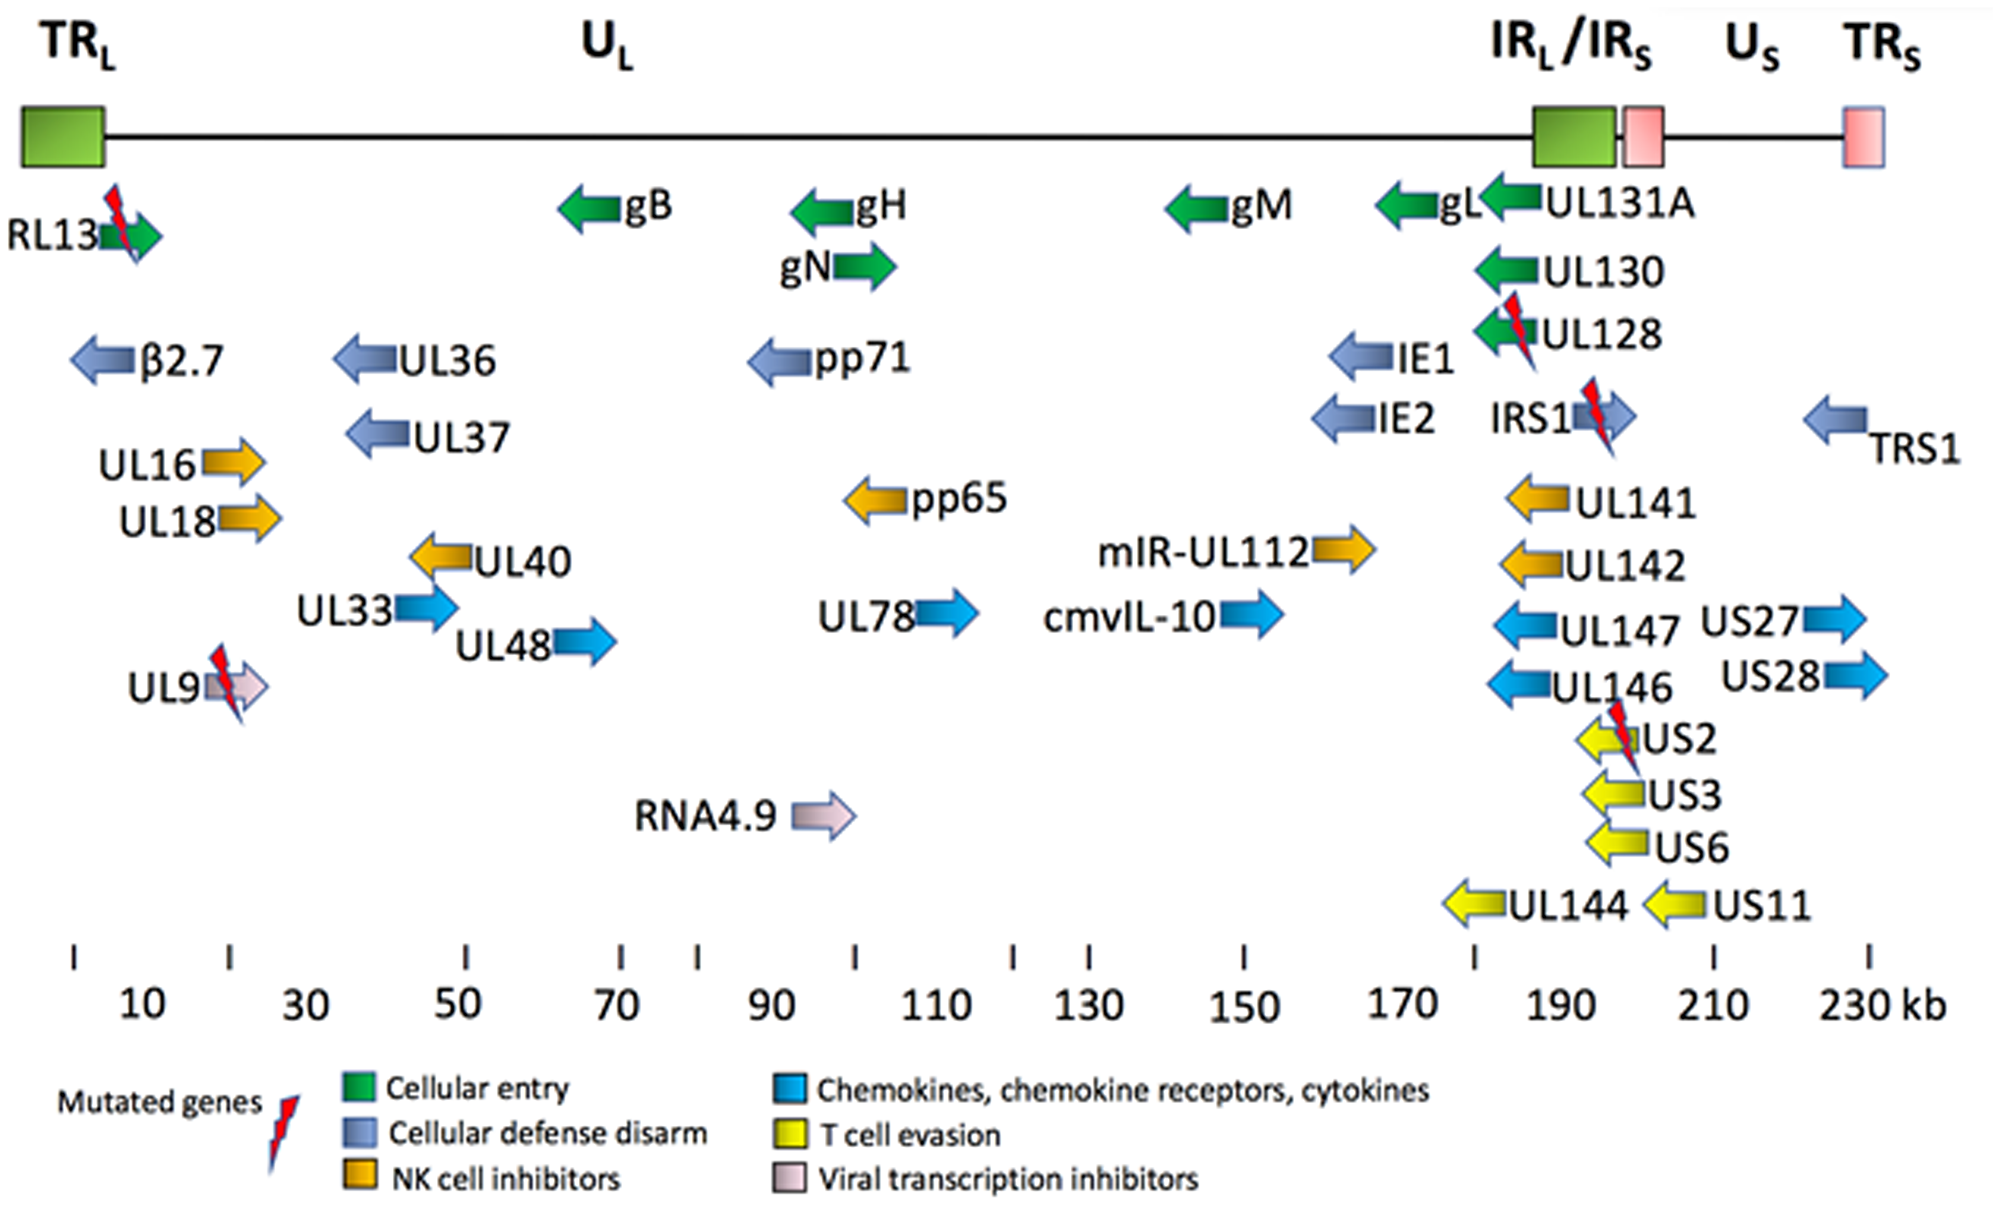 Key proteins encoded by HCMV genome [8, 119].